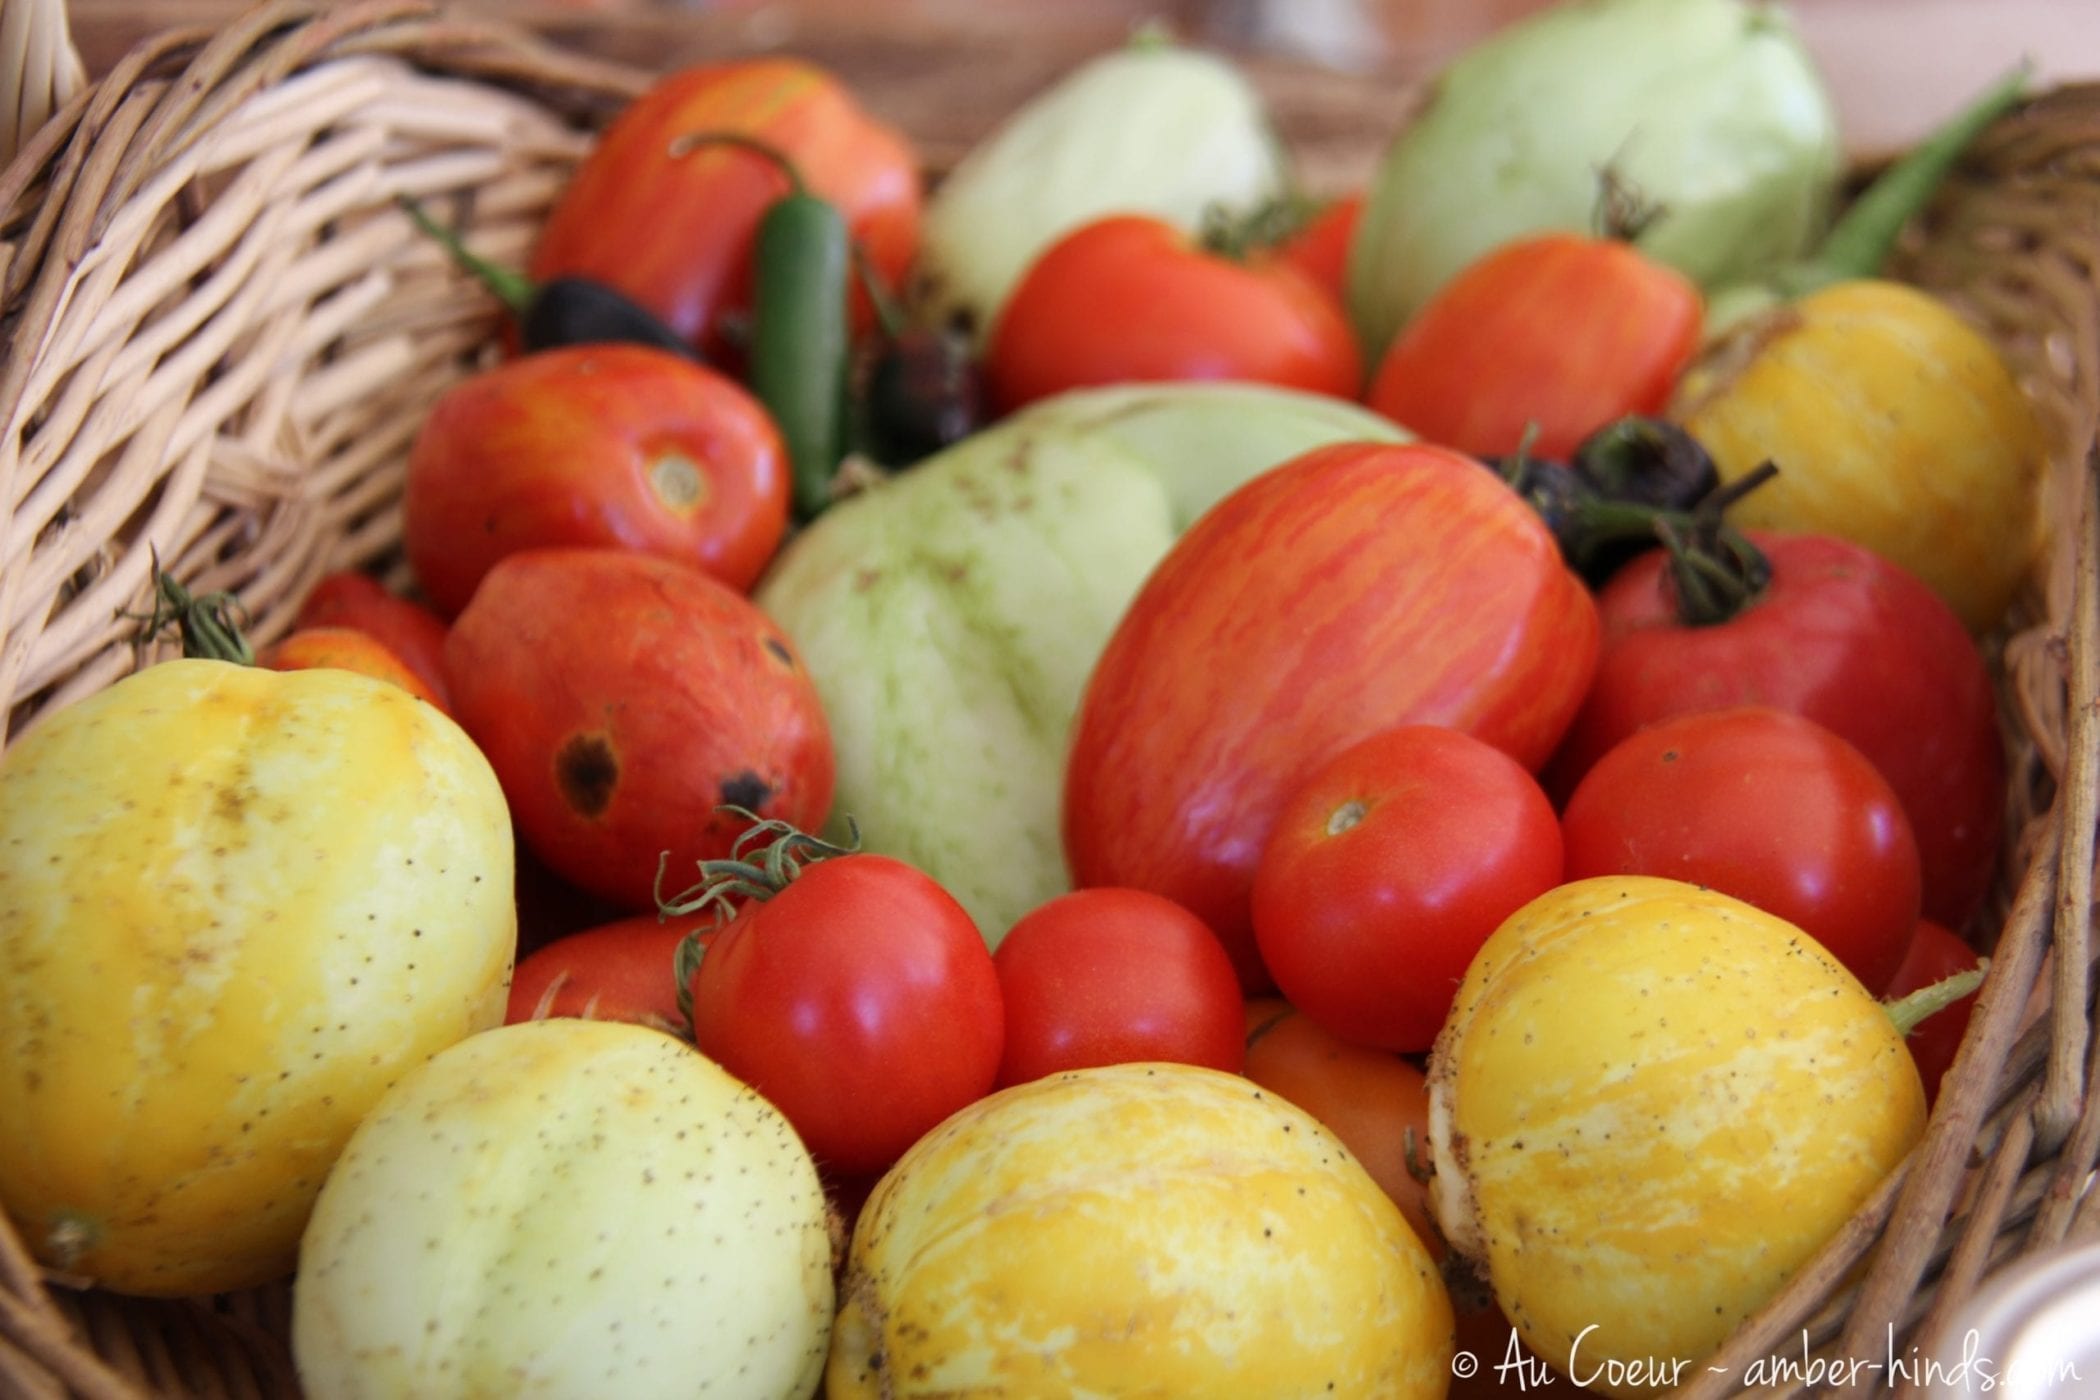 Yellow, green, red, and stripped tomatoes.